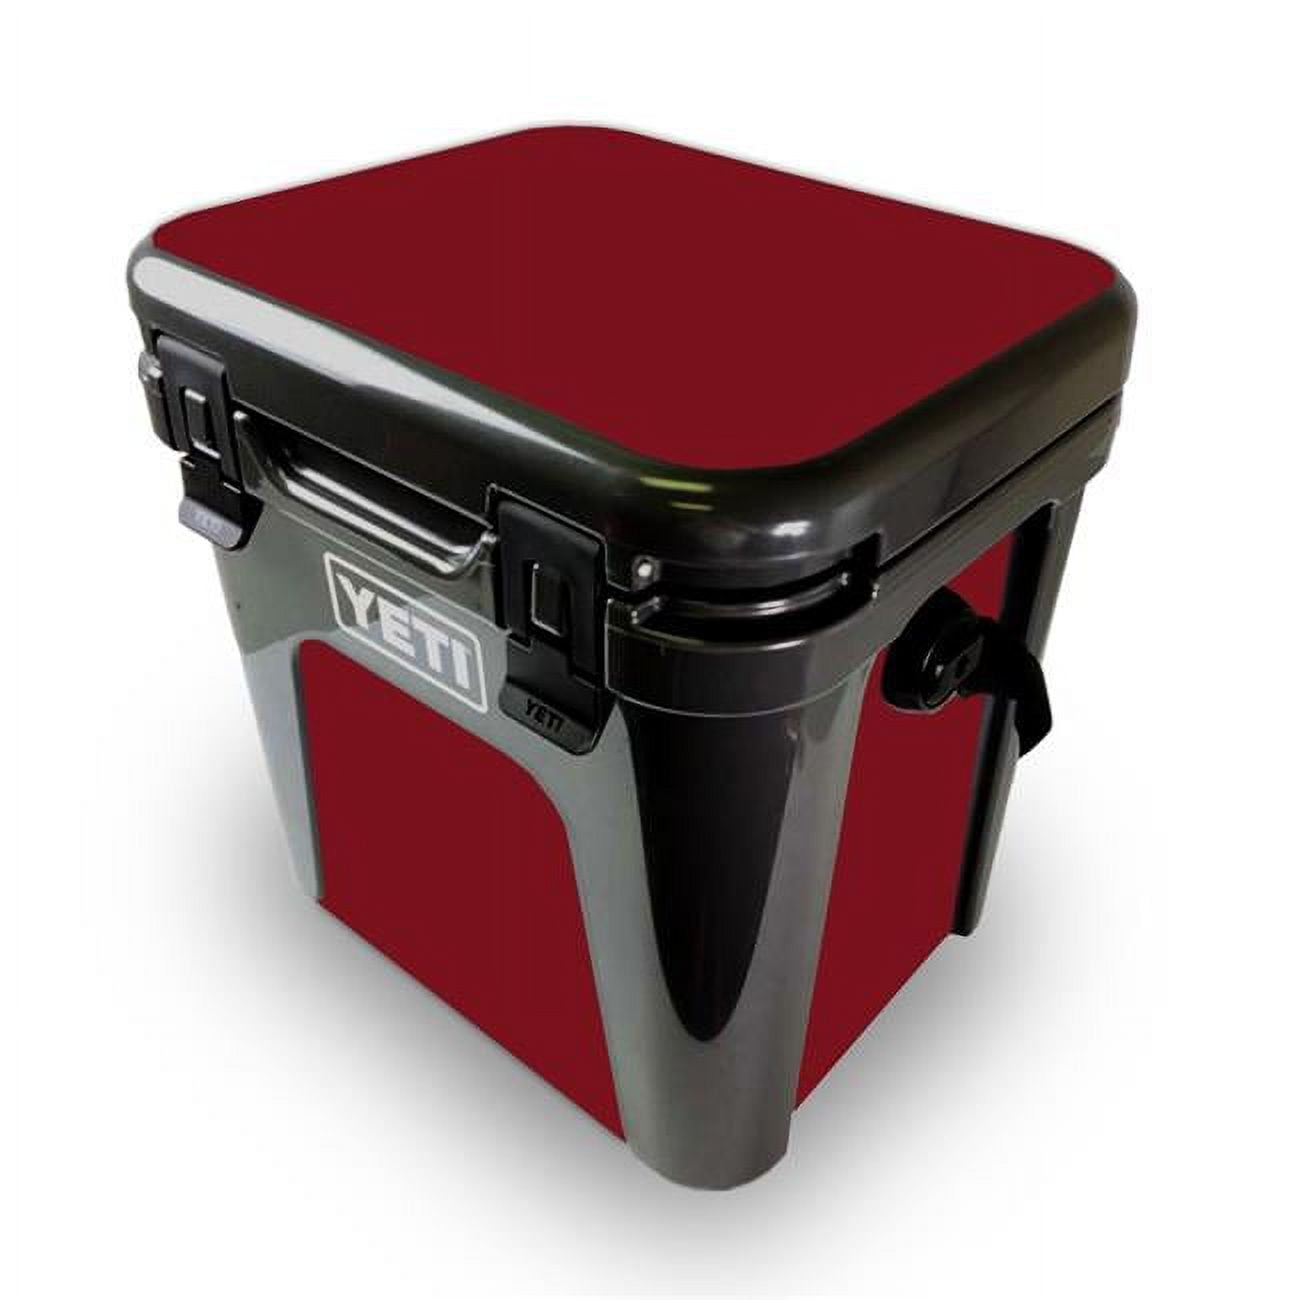 MightySkins YEROAD24-Solid Red Skin for Yeti Roadie 24 Hard Cooler - Solid  Red 